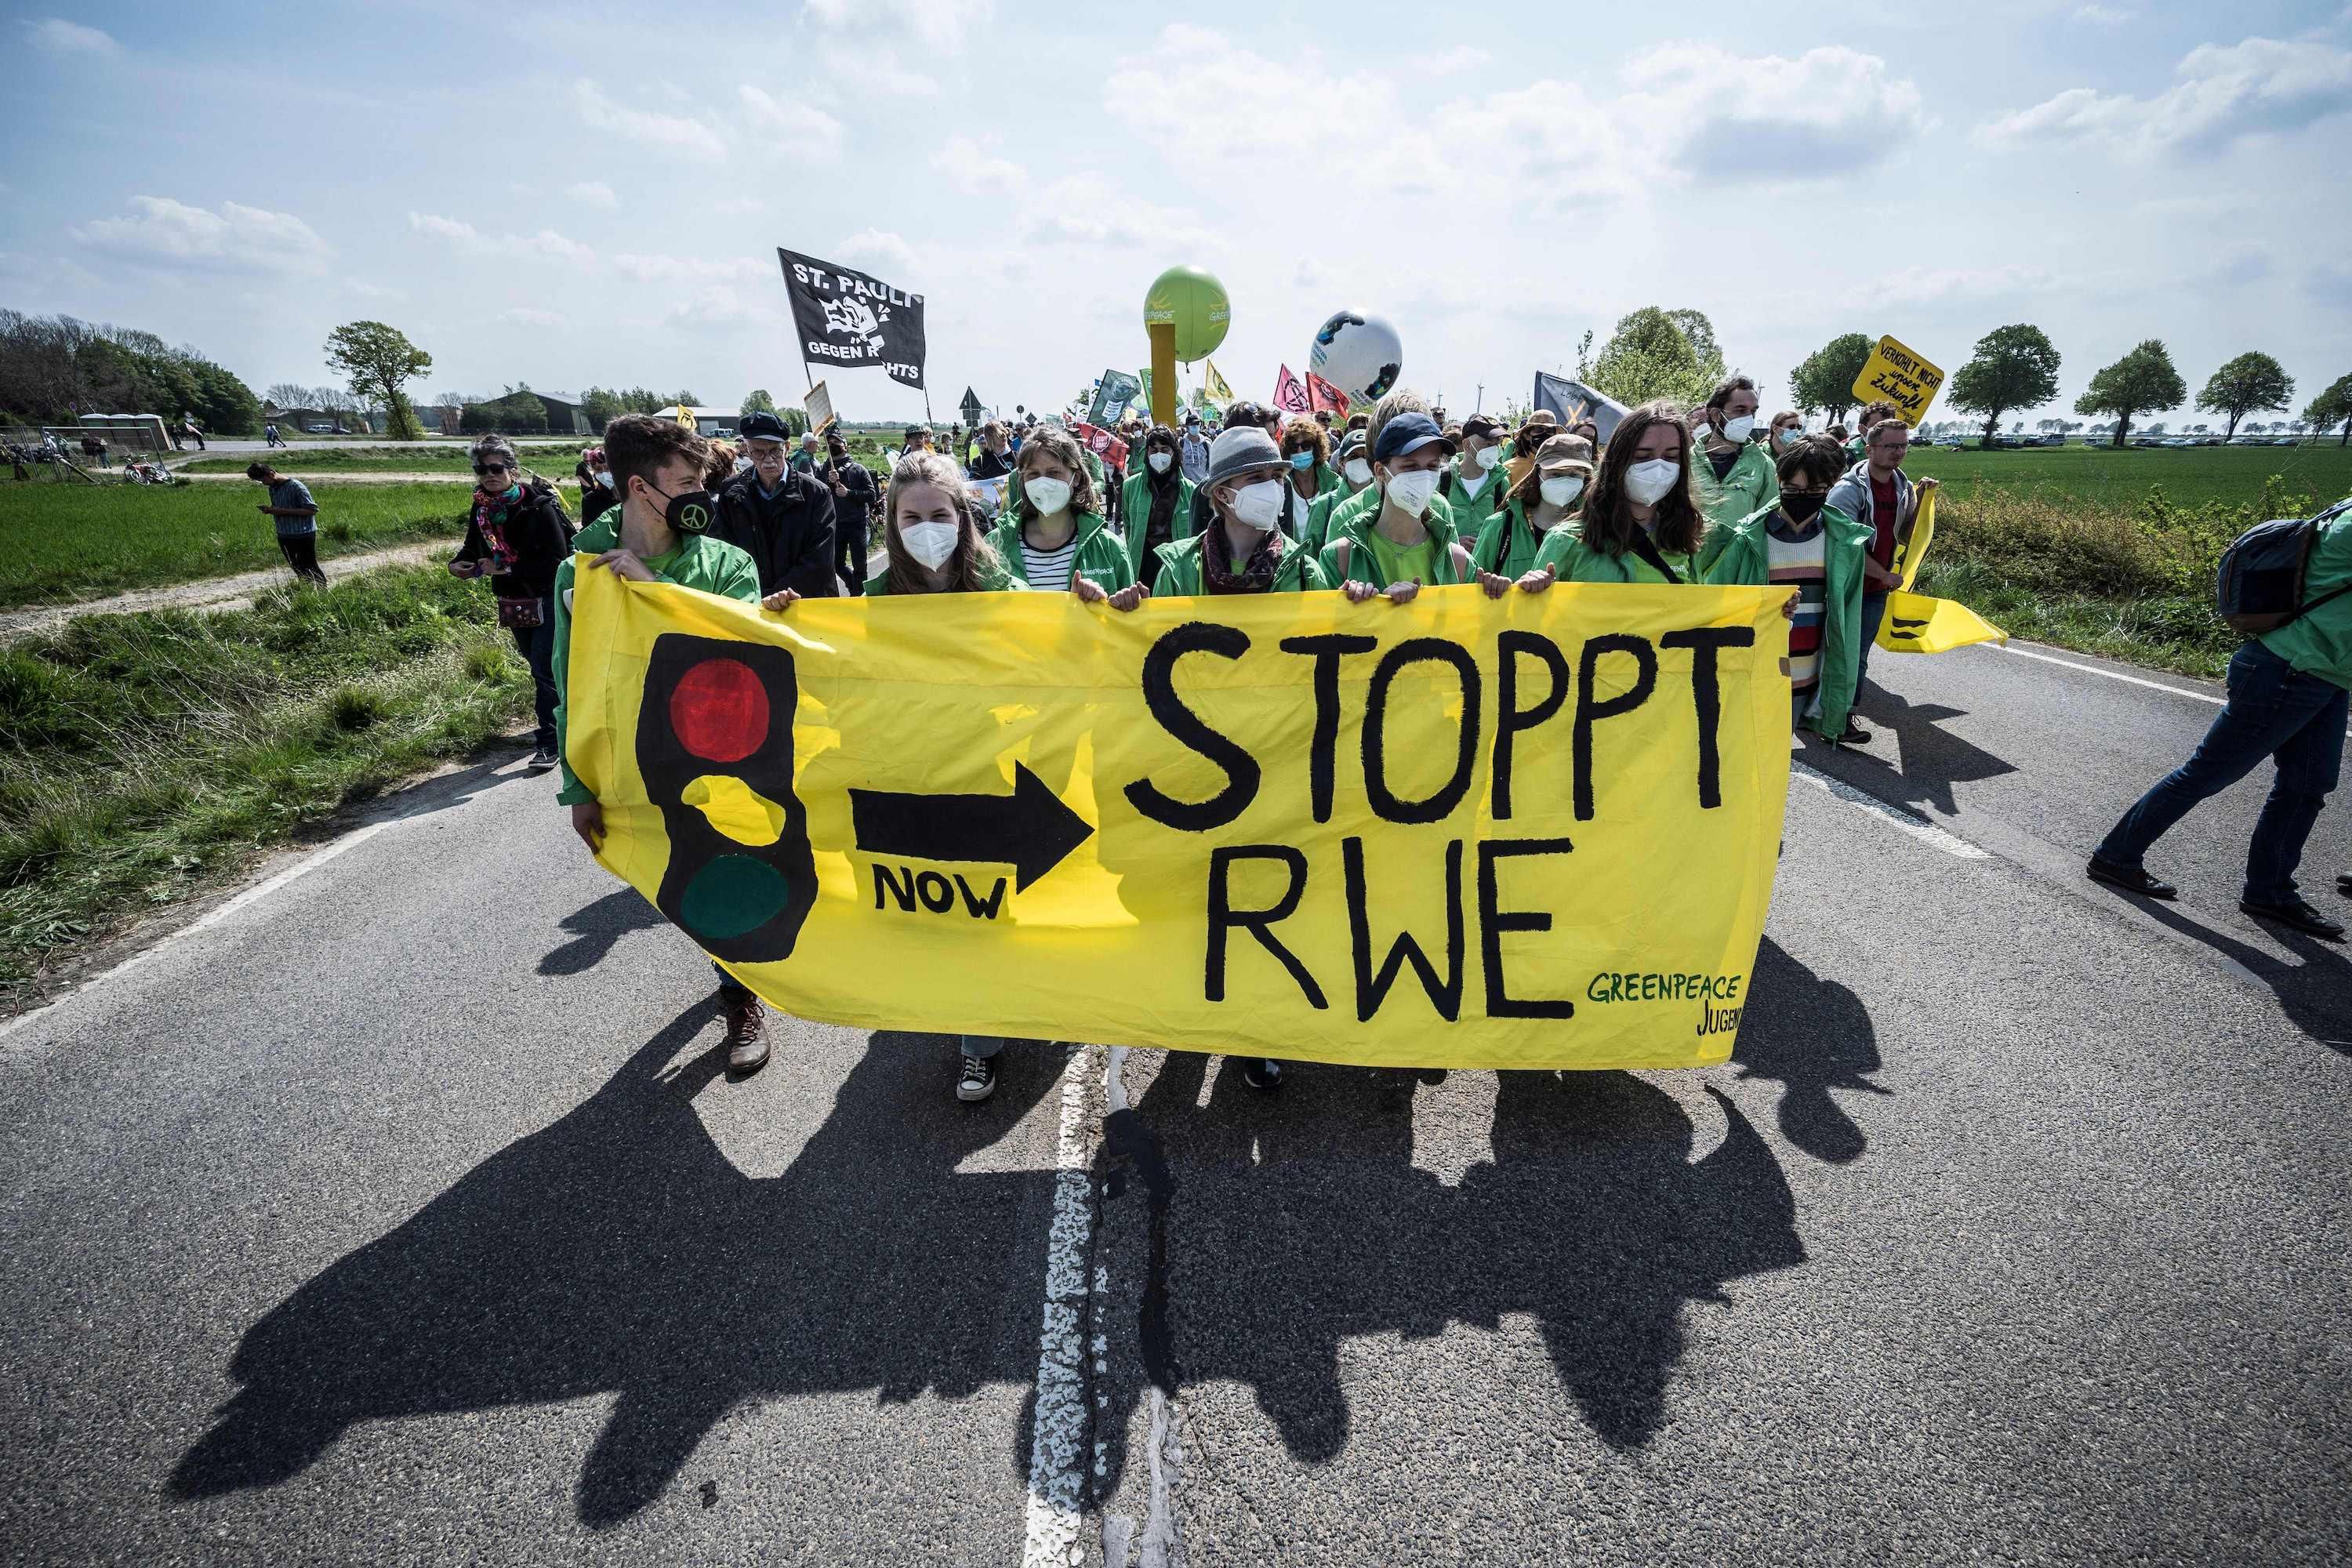 People take part in a protest against the destruction of a village for the expansion of the Garzweiler lignite open cast mine near Lützerath, western Germany, on April 23, 2022. German energy provider RWE is planning to entirely demolish houses in the village of Lützerath for coal mining. (Photo: Bernd Lauter/AFP via Getty Images)